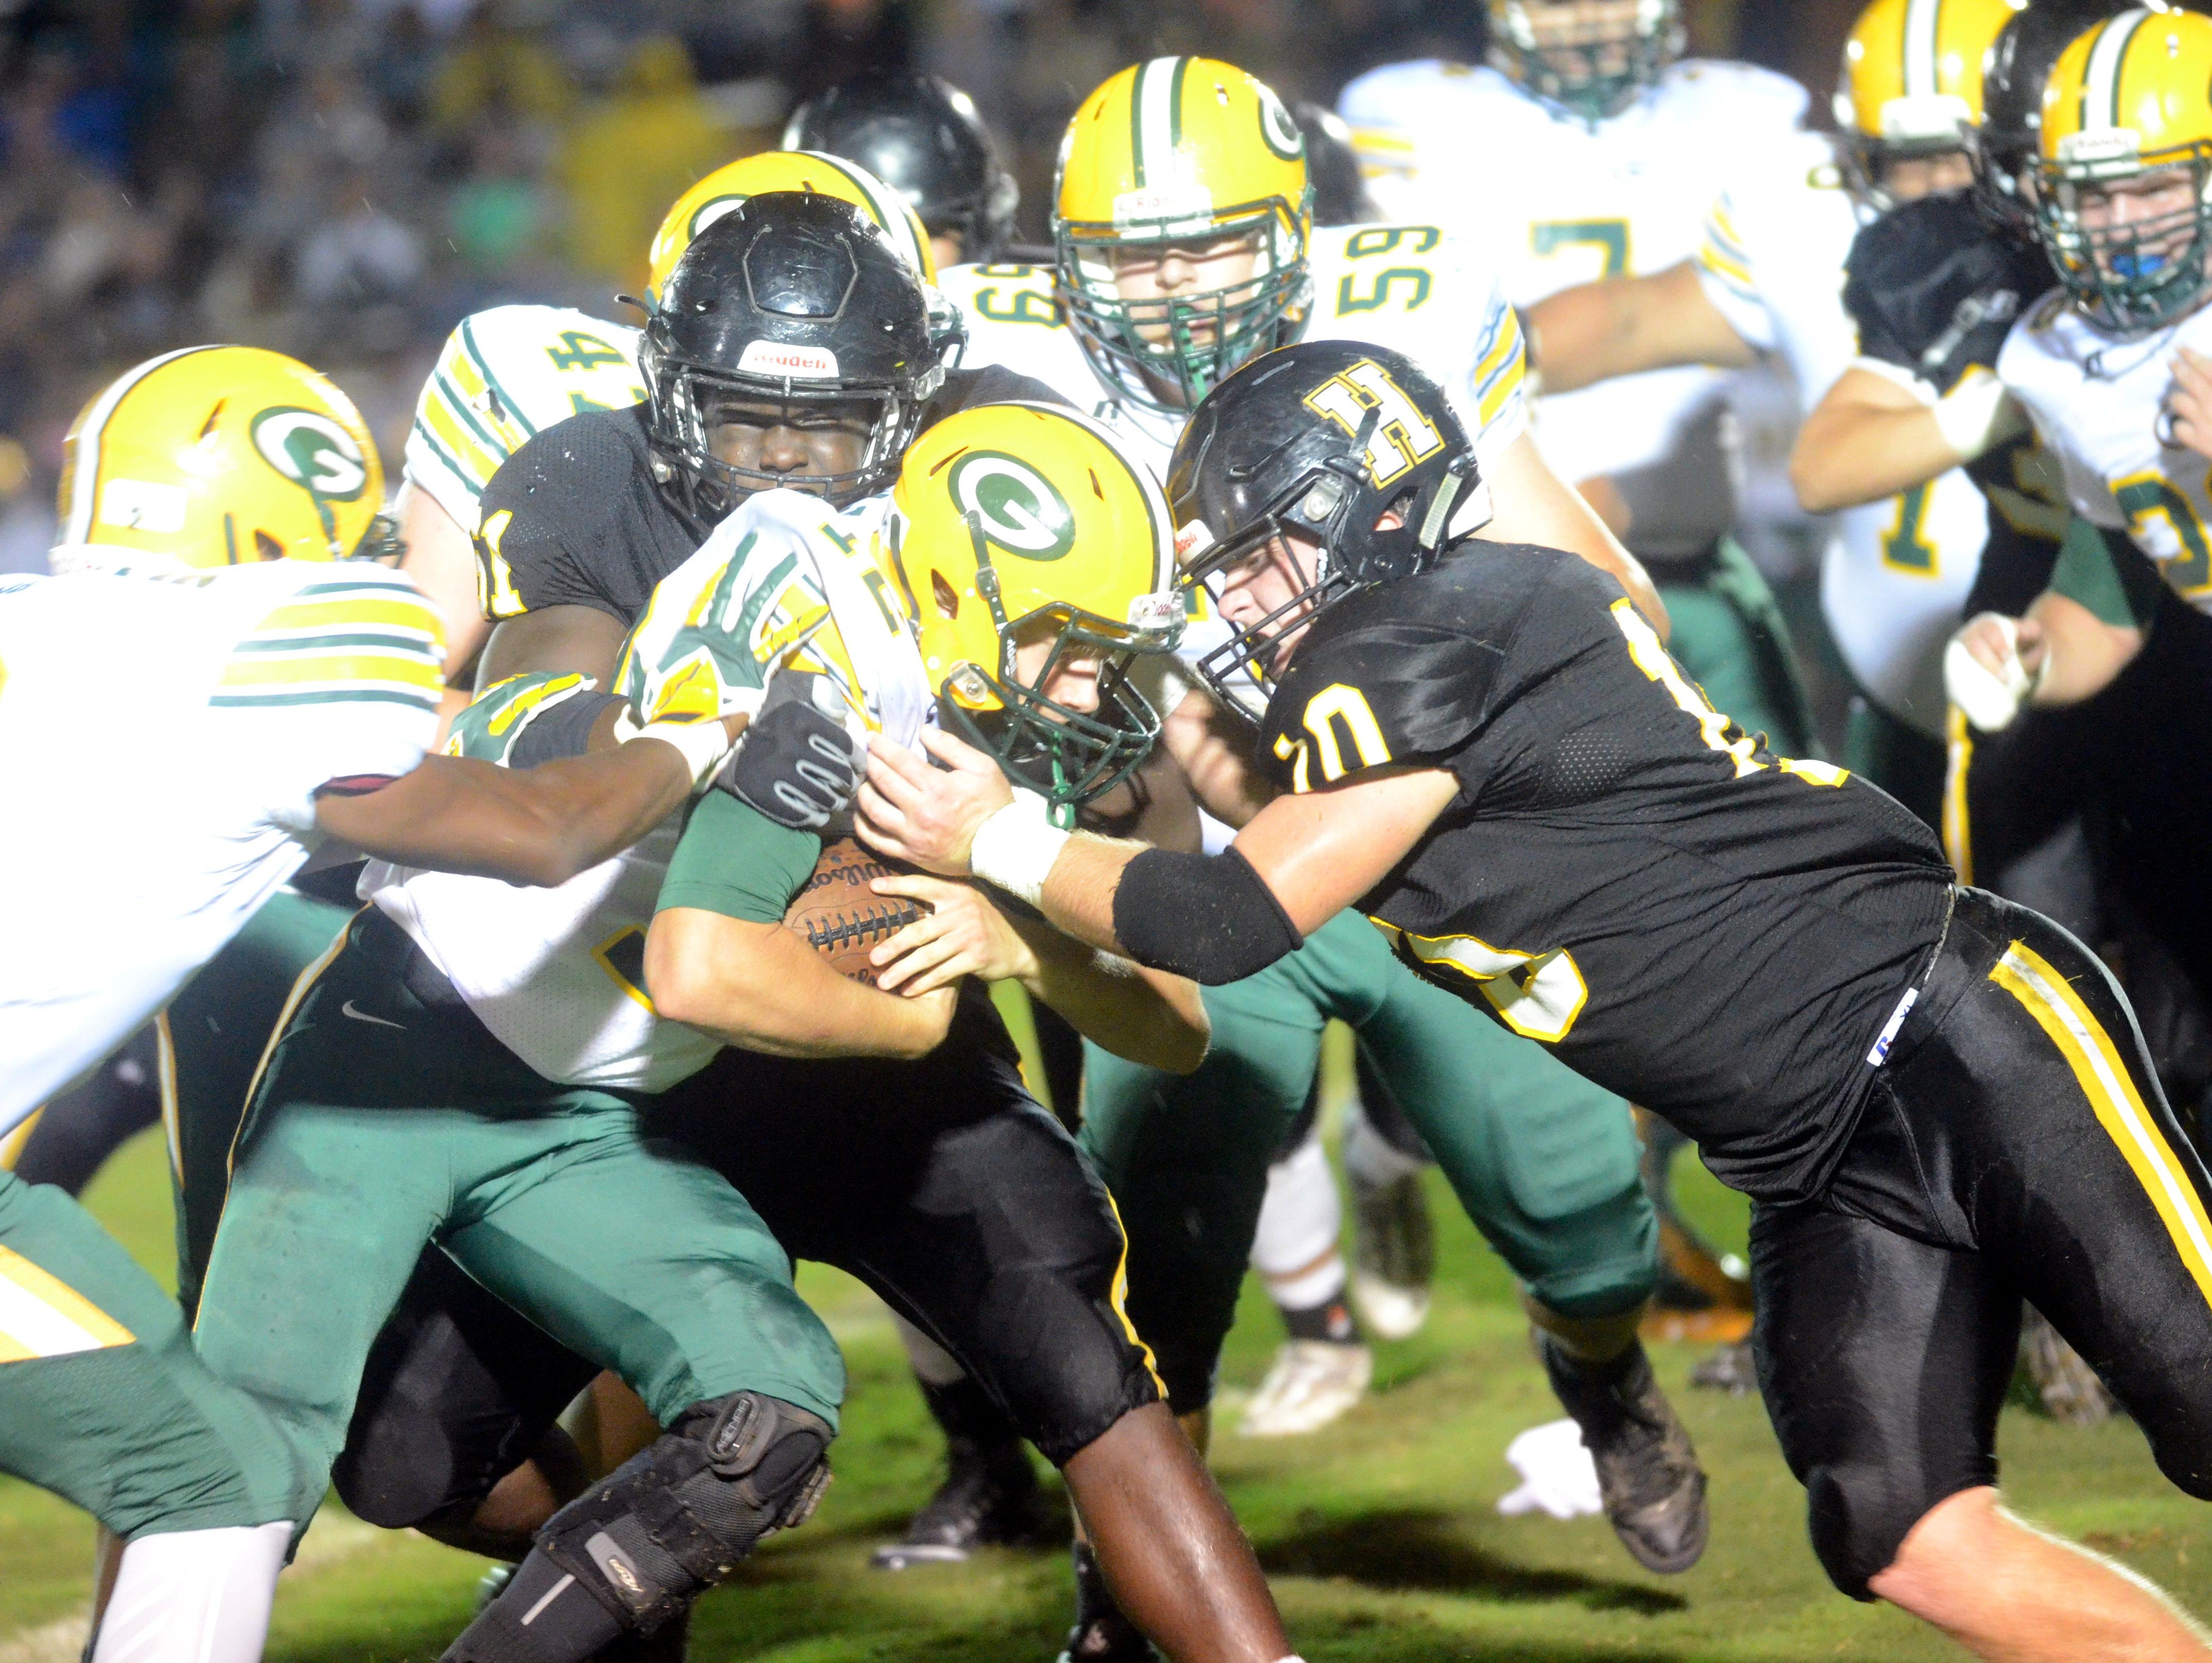 Gallatin High junior quarterback Wyatt Hayes is tackled by Hendersonville seniors Alex Tate and Jack Towe during second-quarter action.